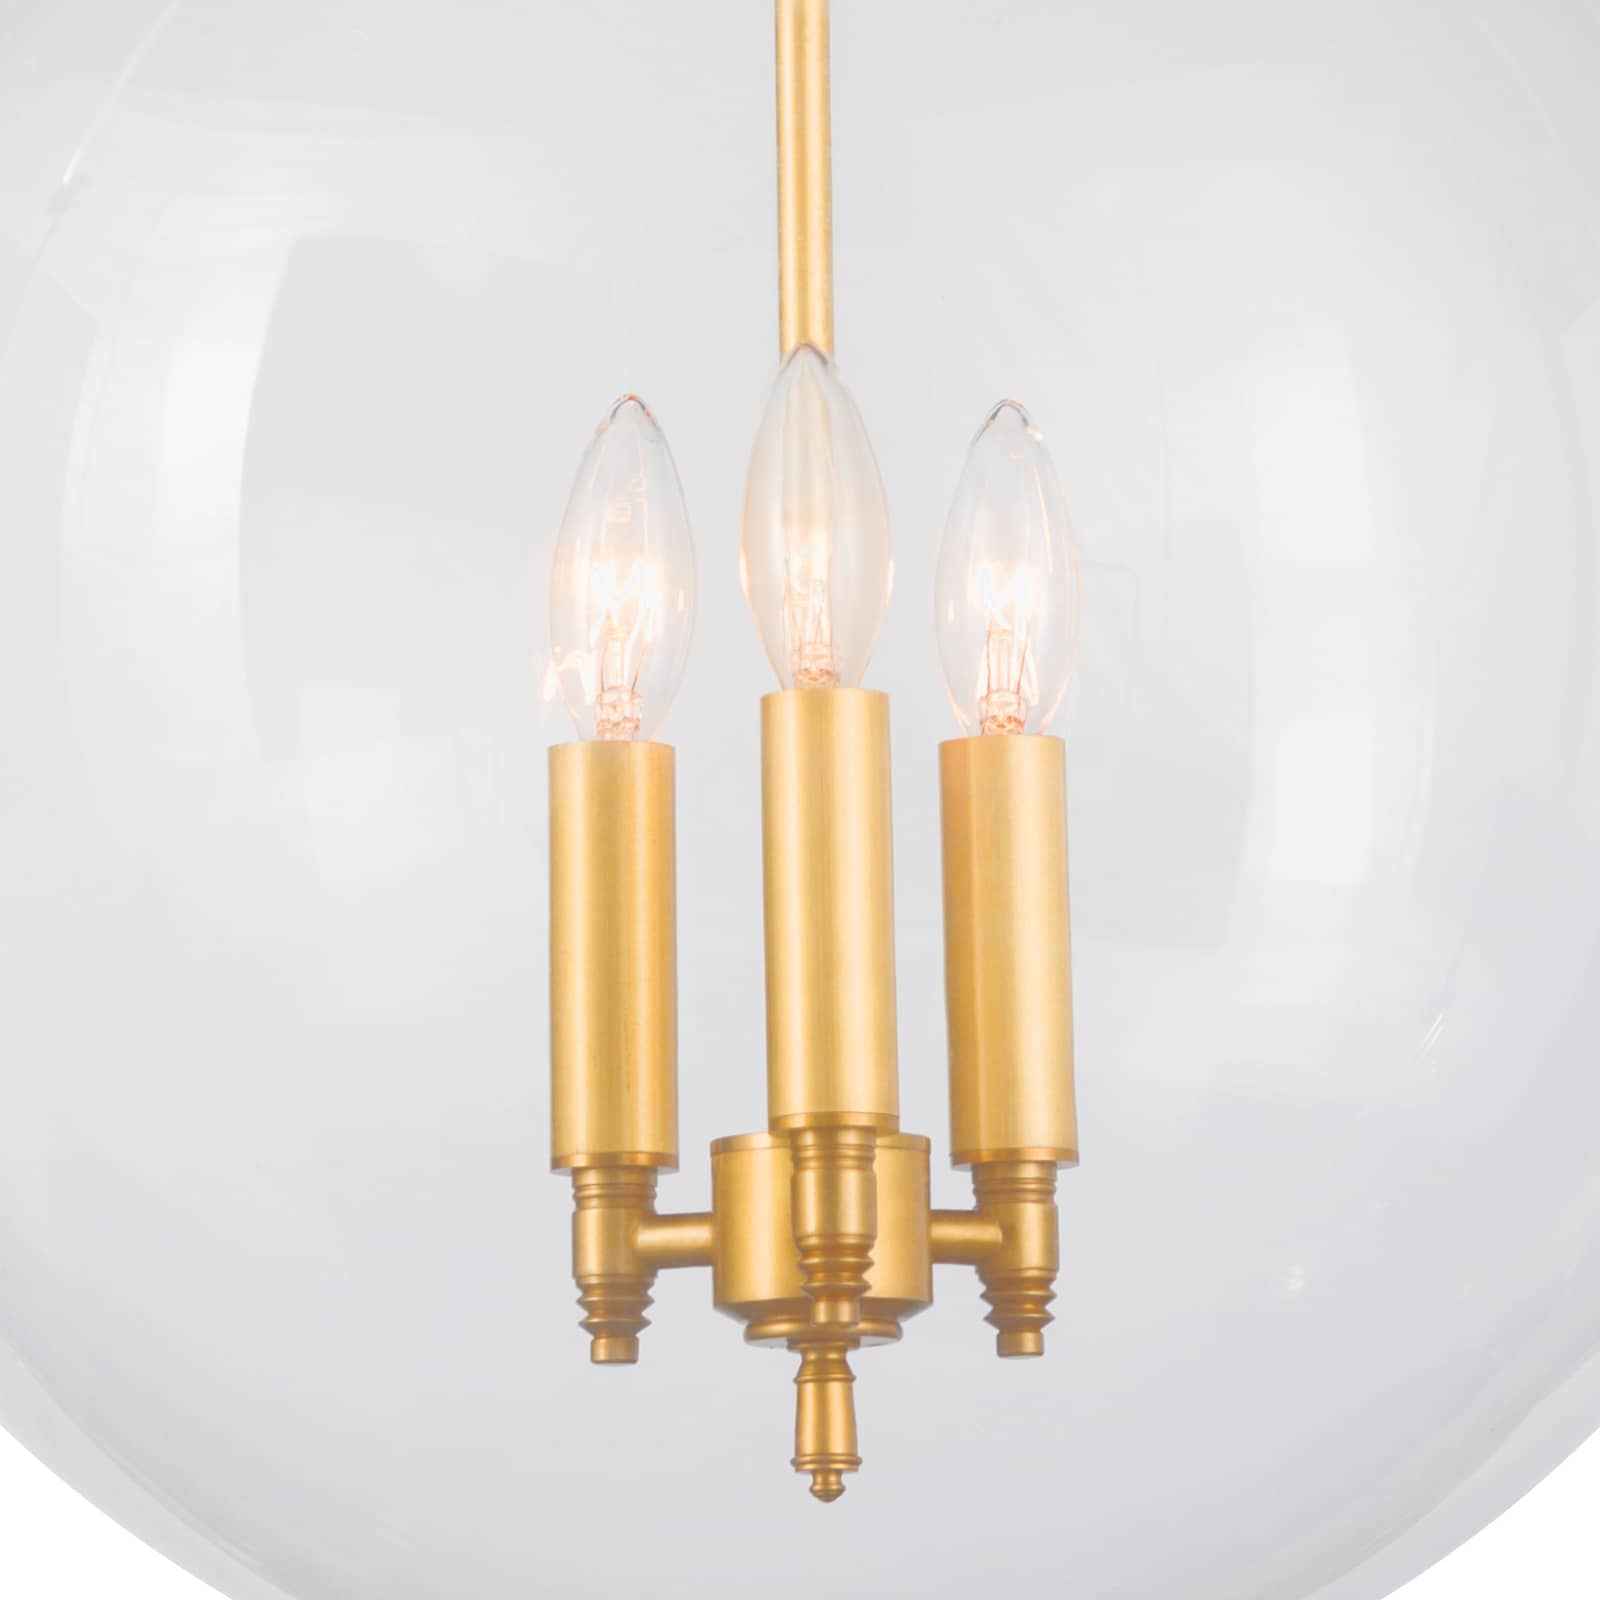 Globe Pendant in Oil Rubbed Bronze and Natural Brass by Southern Living